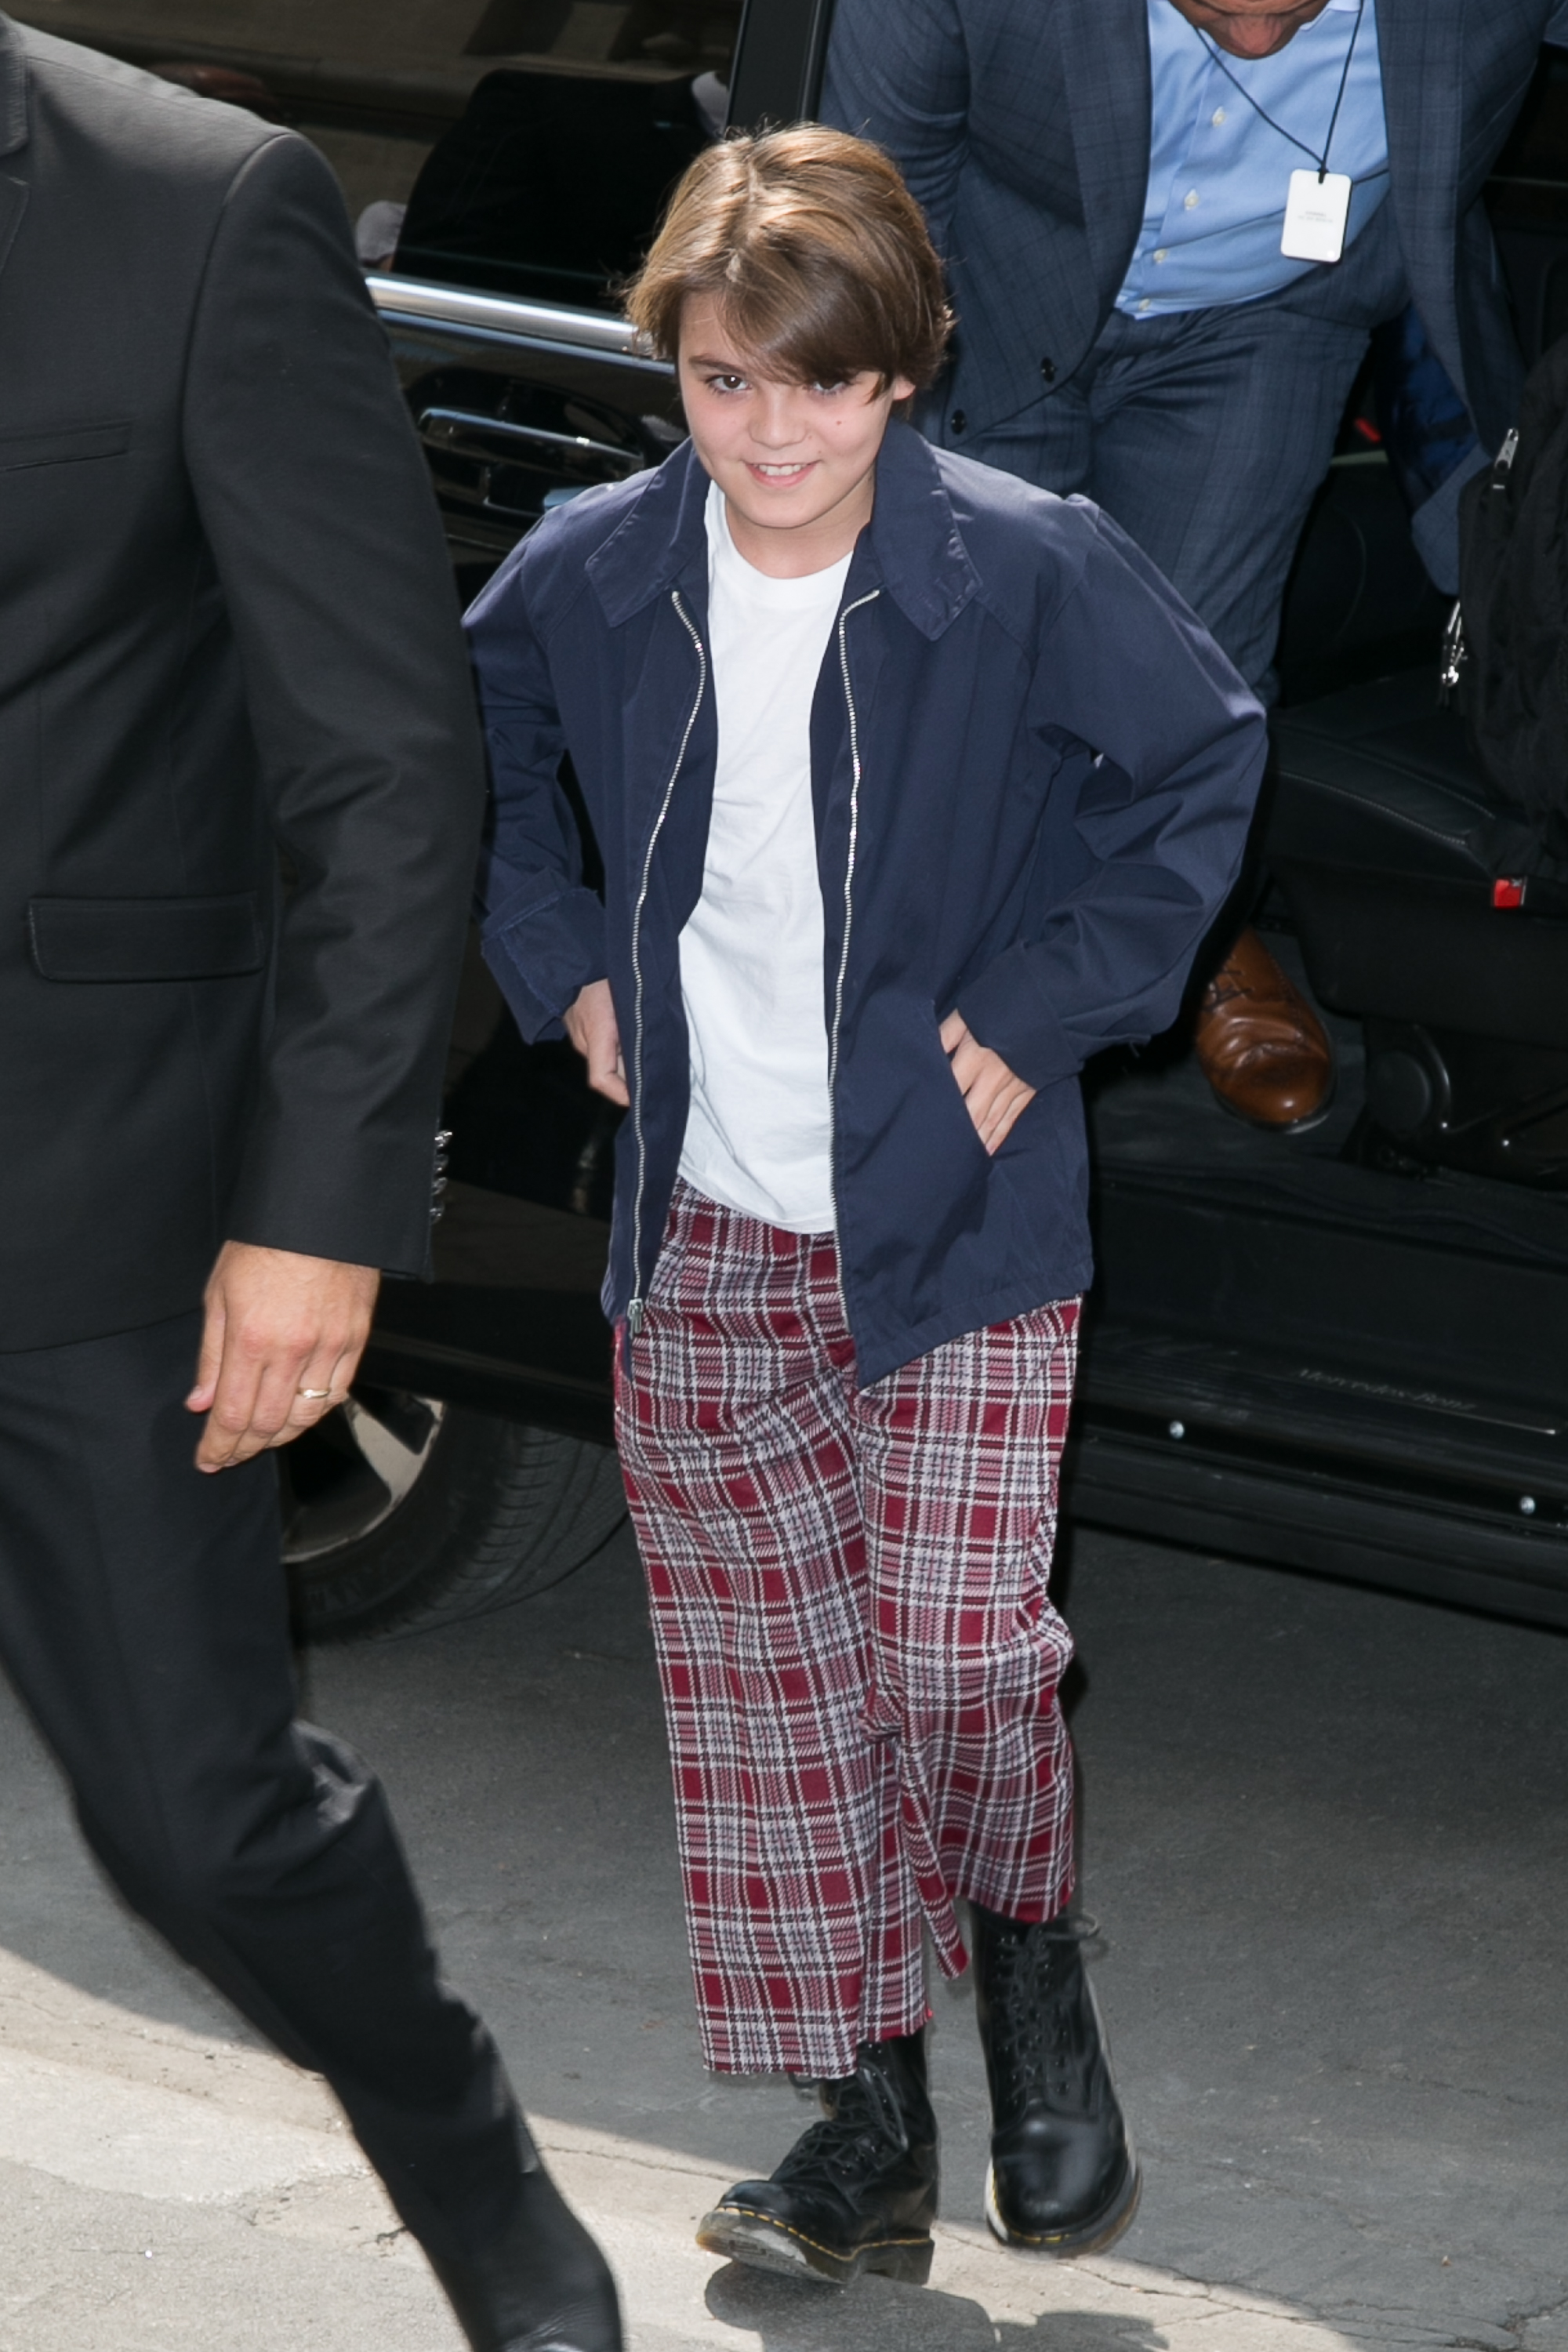 Jack Depp was photographed attending the Chanel show at Paris Fashion Week in July 2015 | Source: Getty Images